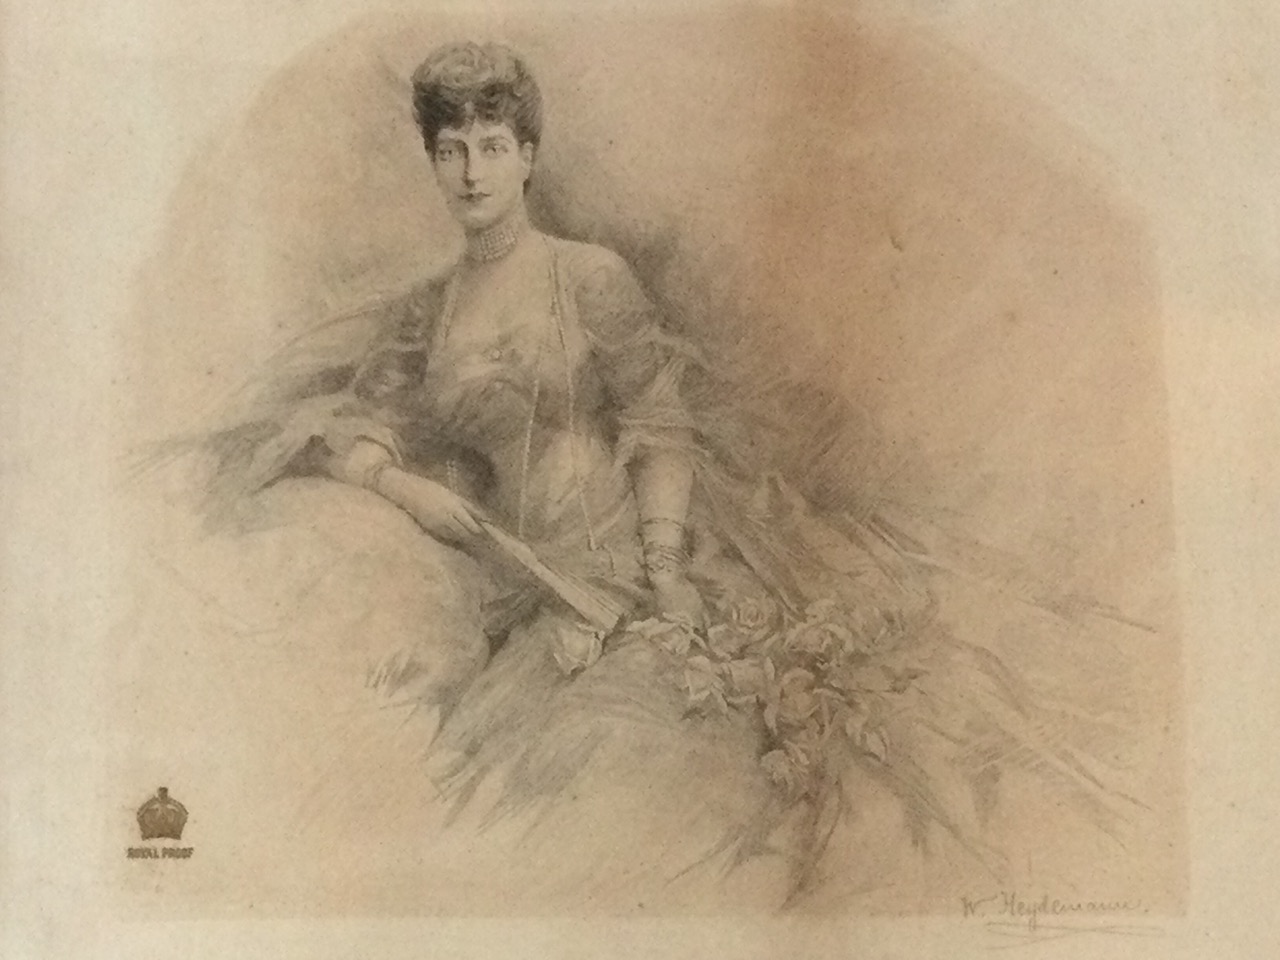 An Edwardian proof etching of Queen Alexandria by W Heydemann, the lady in repose with flowers, with